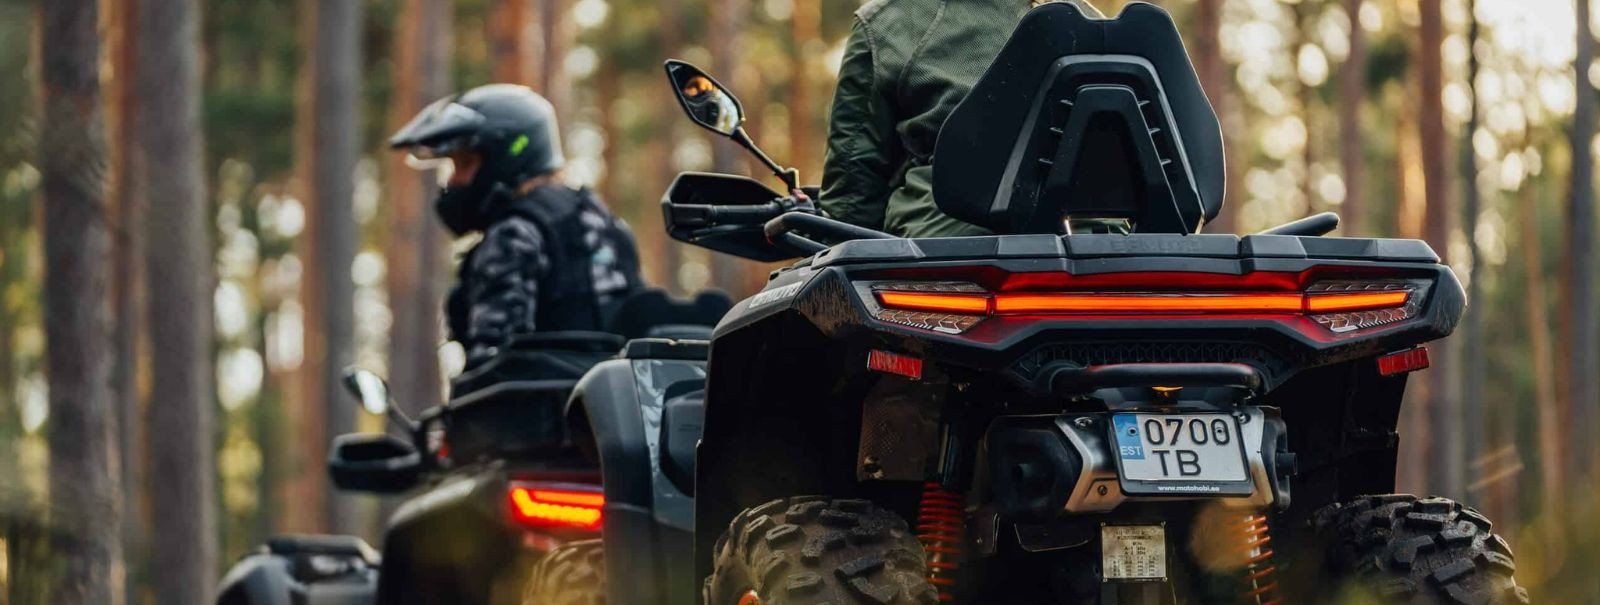 For outdoor enthusiasts and motocycling aficionados, an All-Terrain Vehicle (ATV) is not just a vehicle, but a passport to adventure. To ensure that every ride 